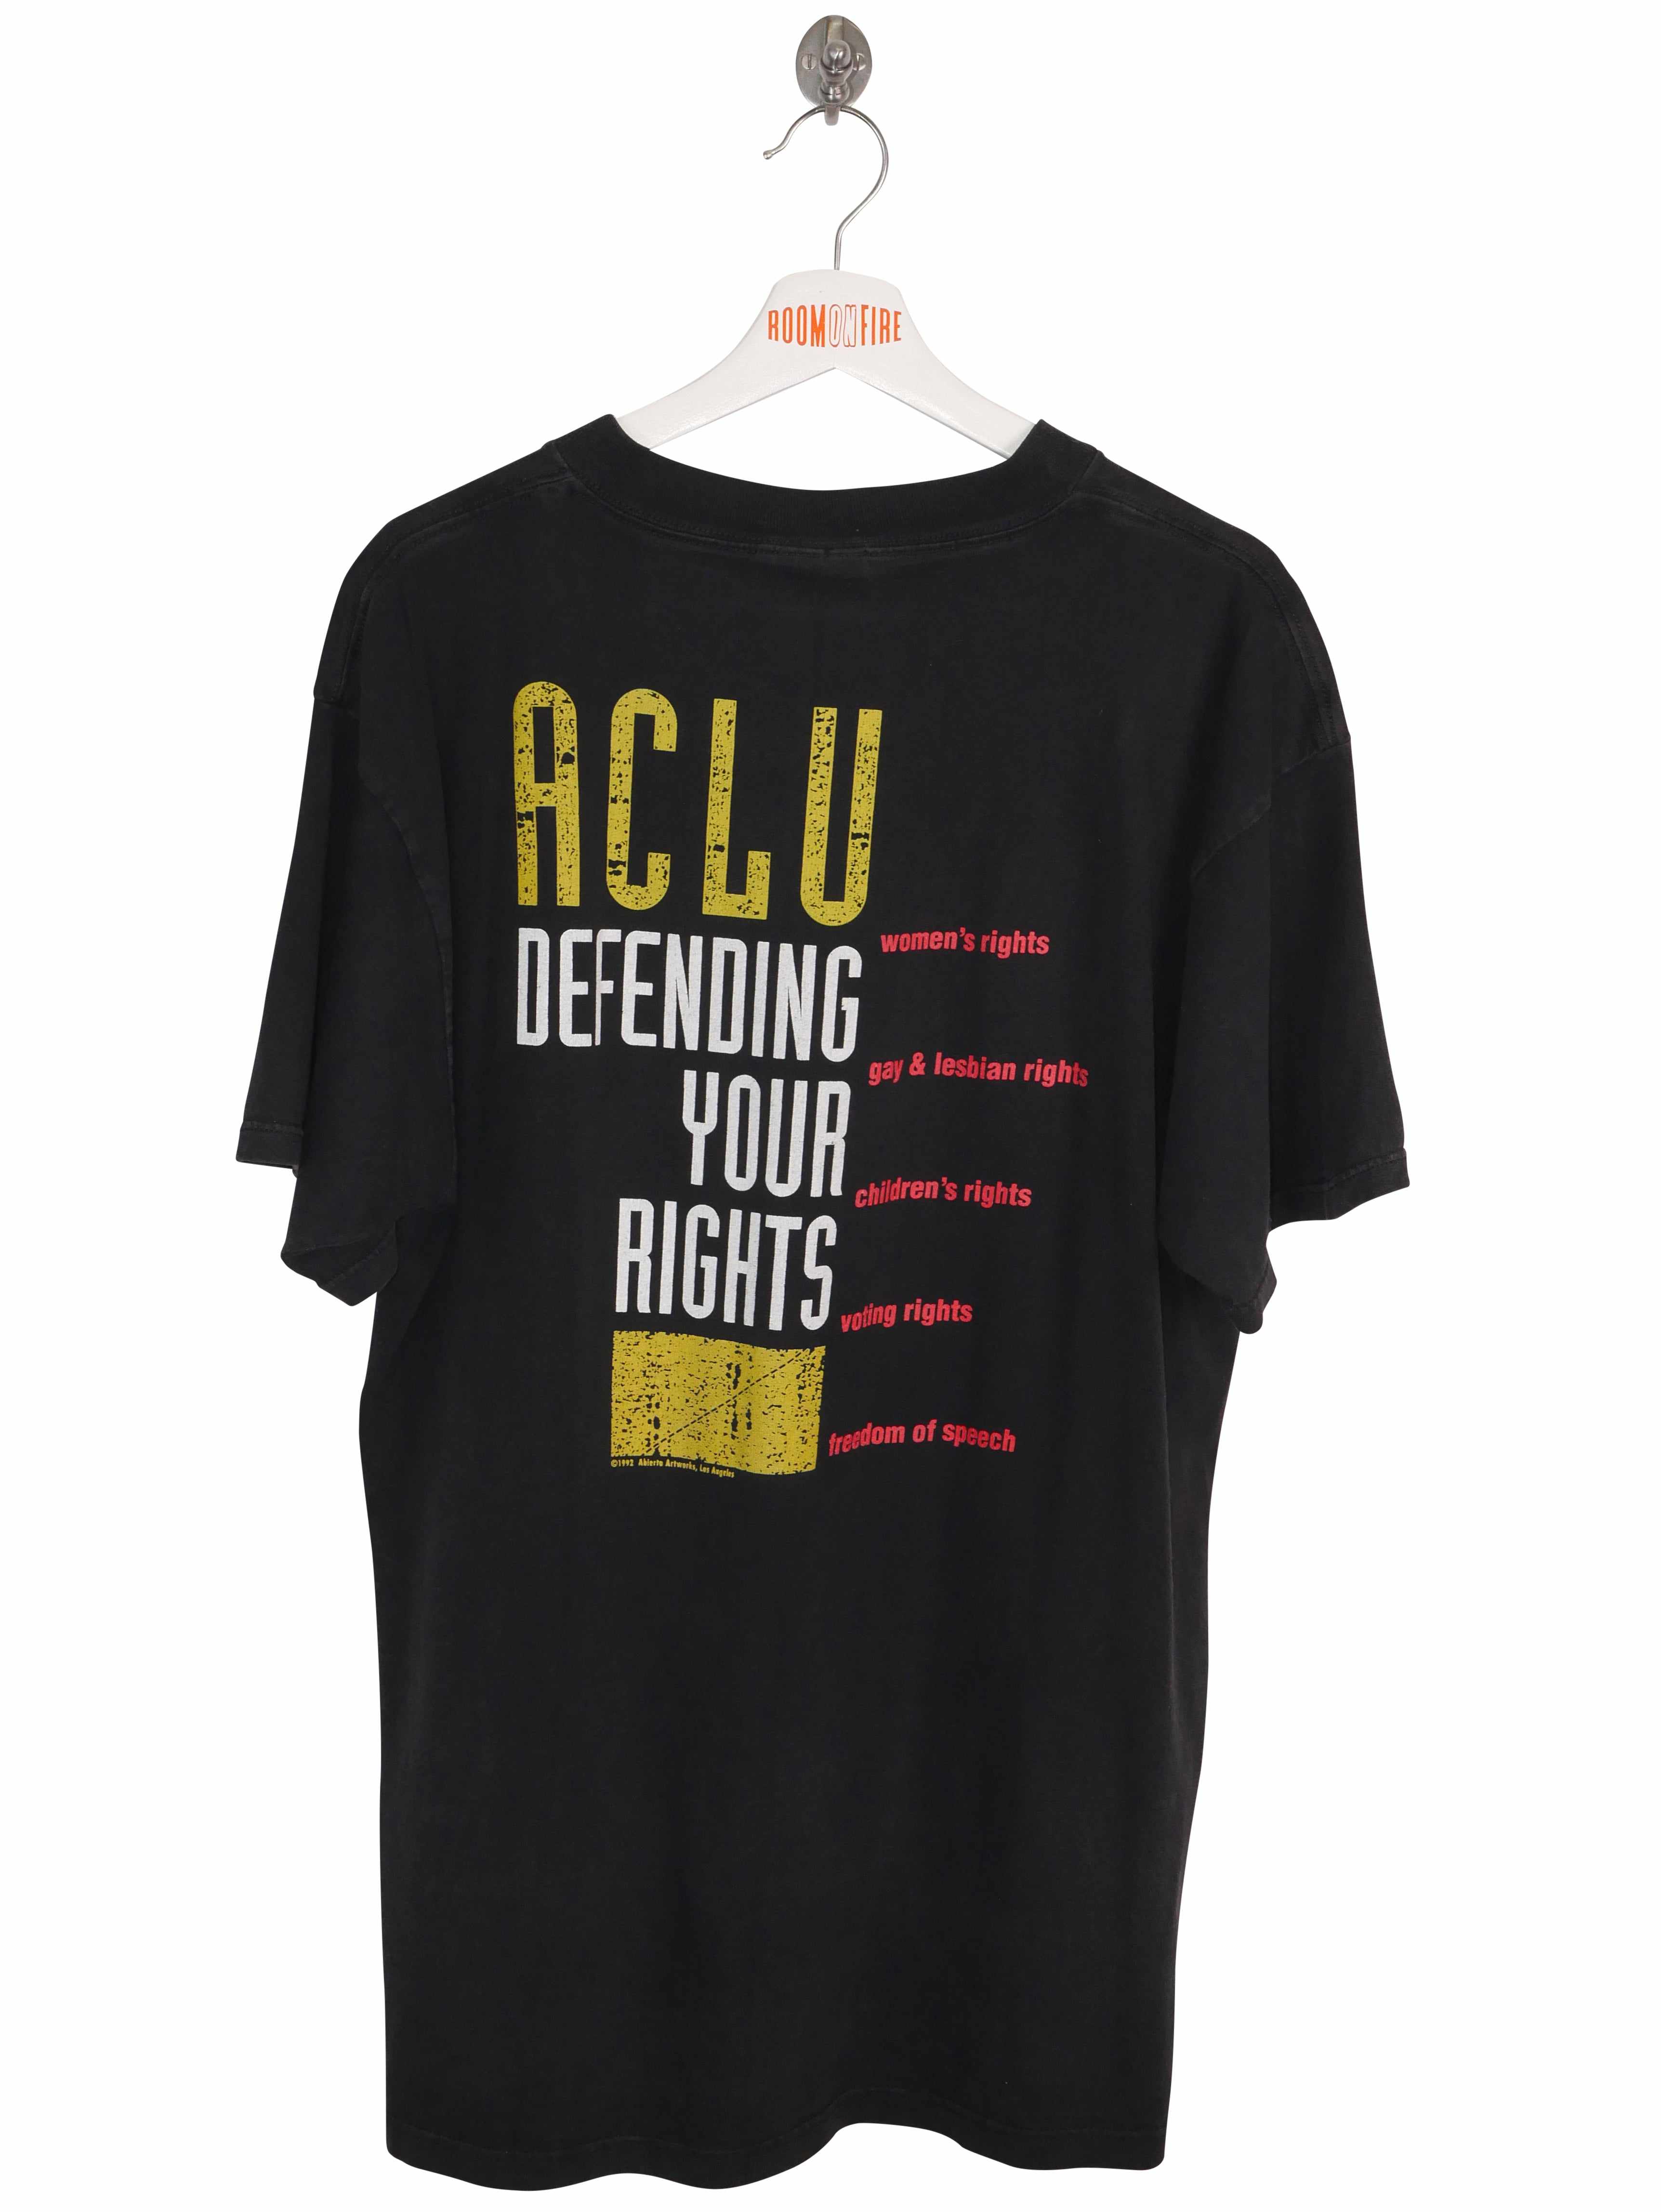 Vintage 1992 ACLU 'You Have the Right Not to Remain Silent' T-Shirt (XL)-T-SHIRT-MISCELLANEOUS-SIZE XL-Room On Fire